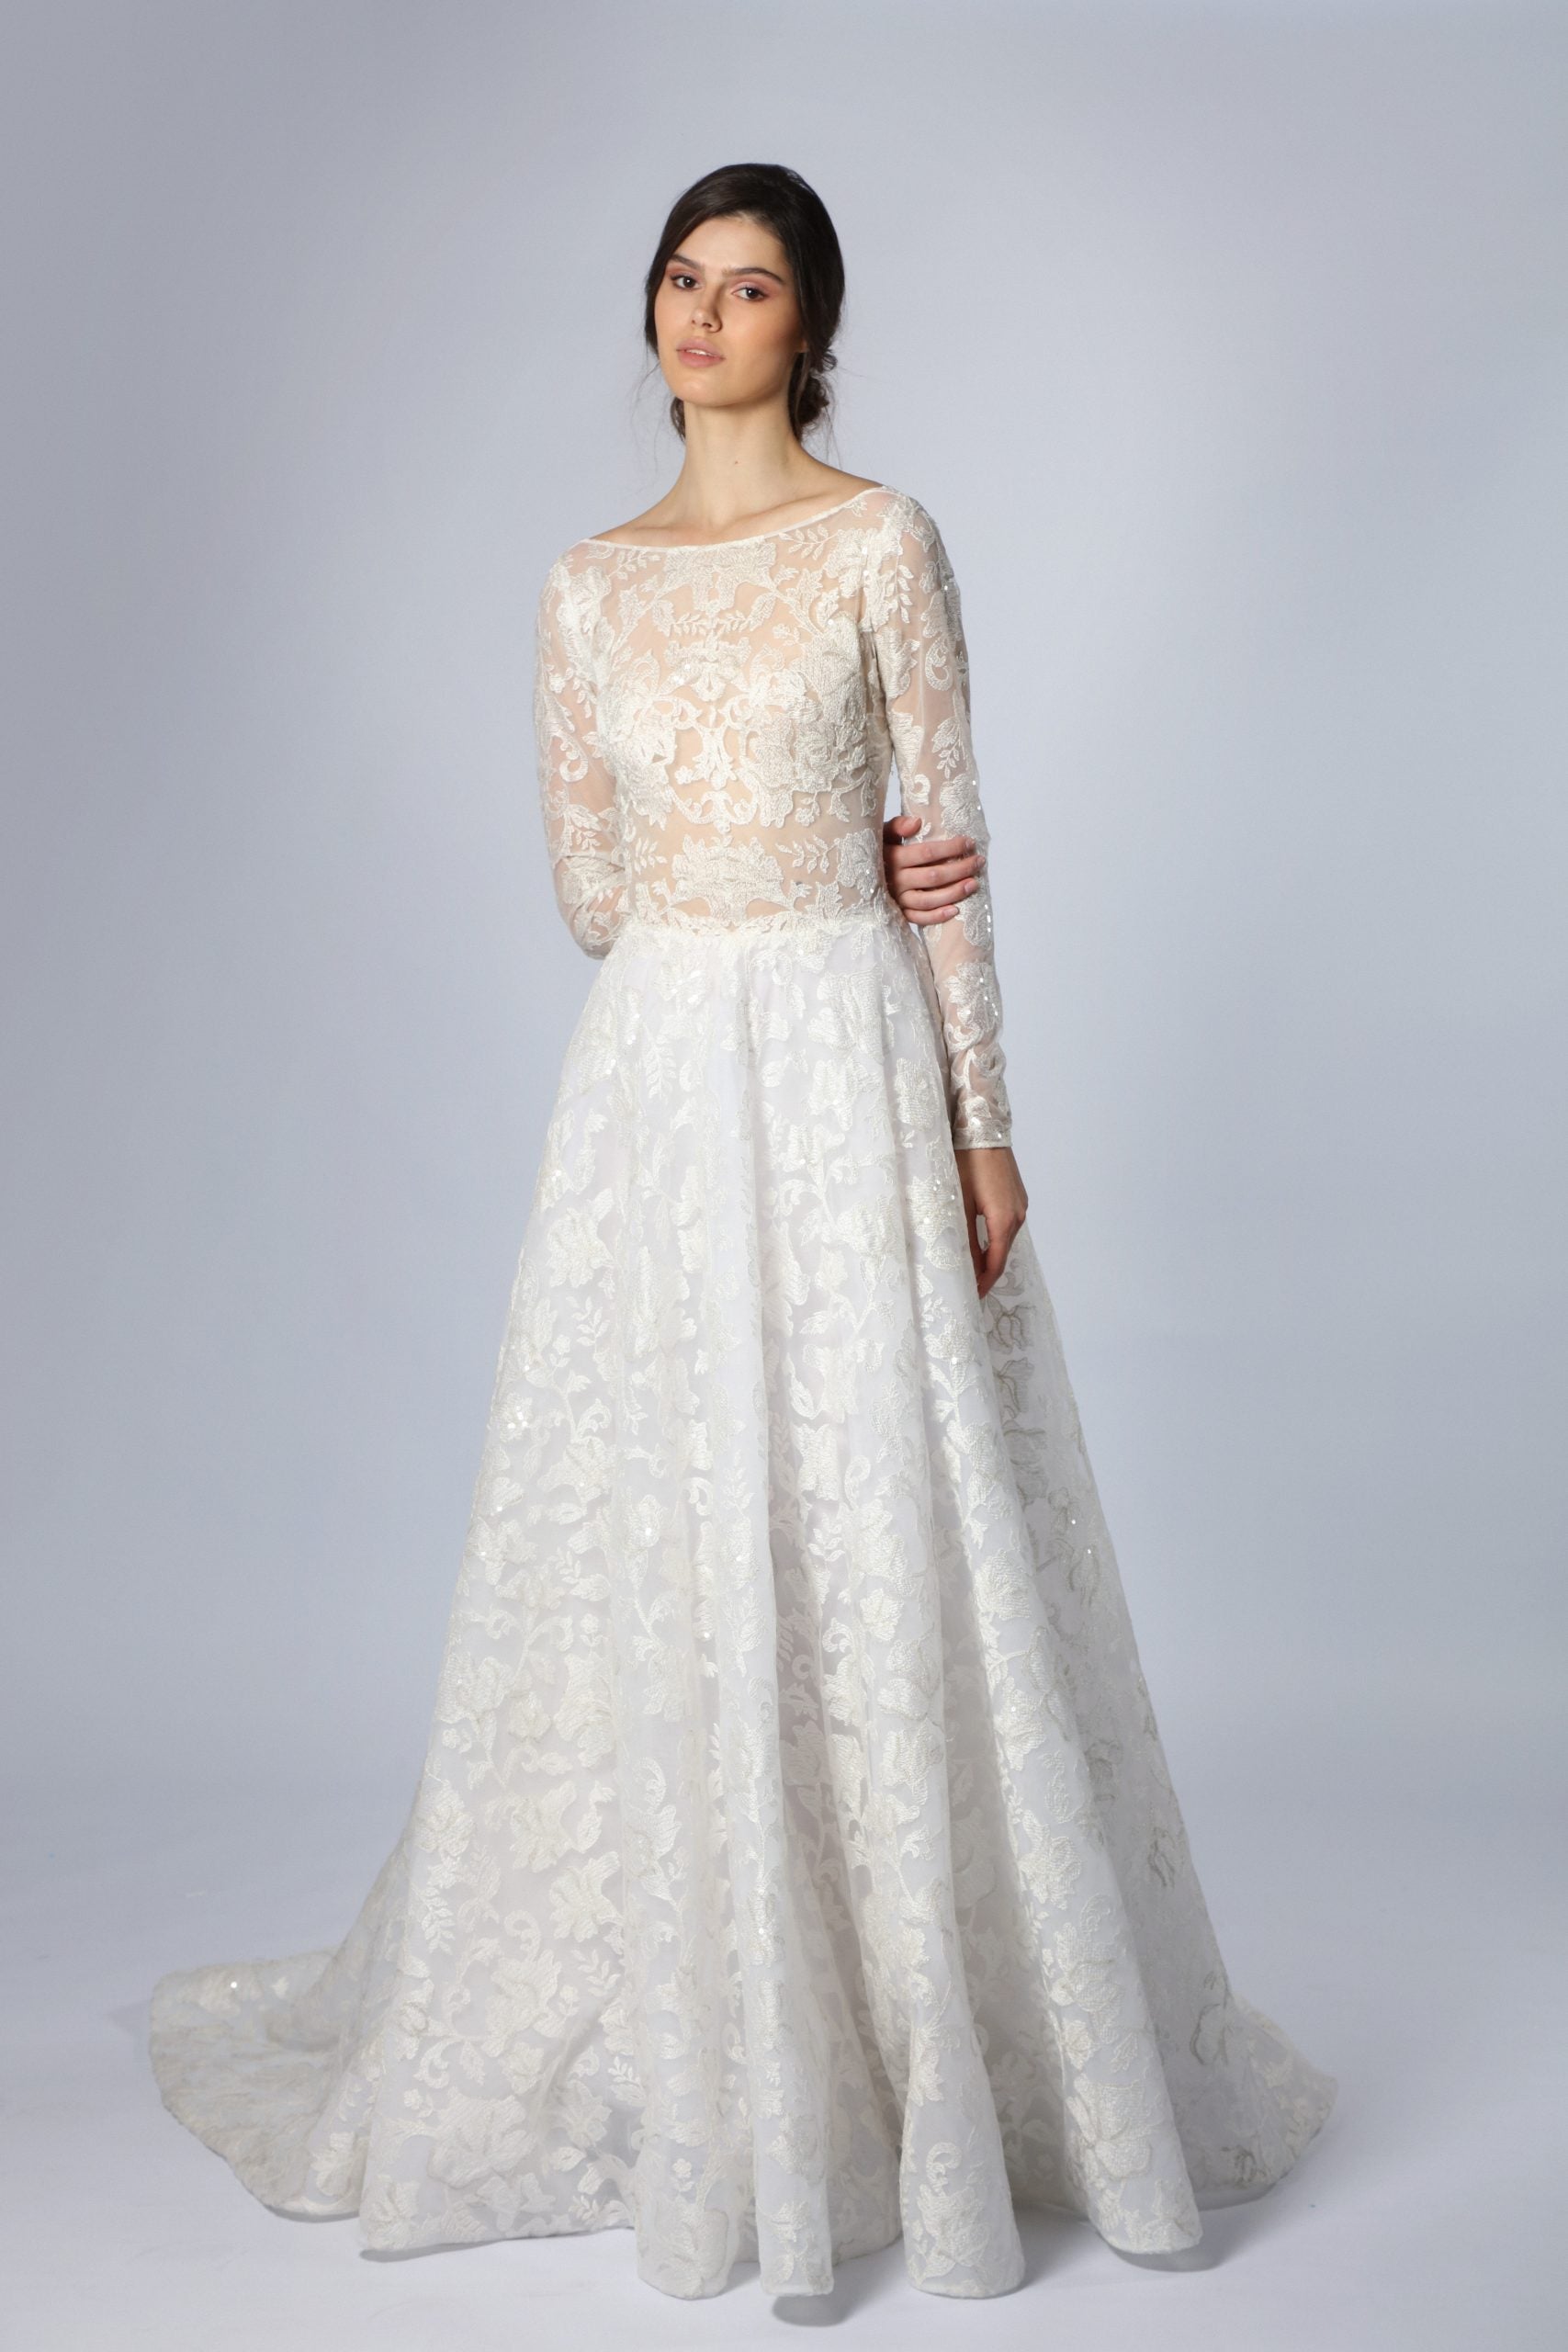 Embroidered Long Sleeve A-Line Gown by Tony Ward - Image 1